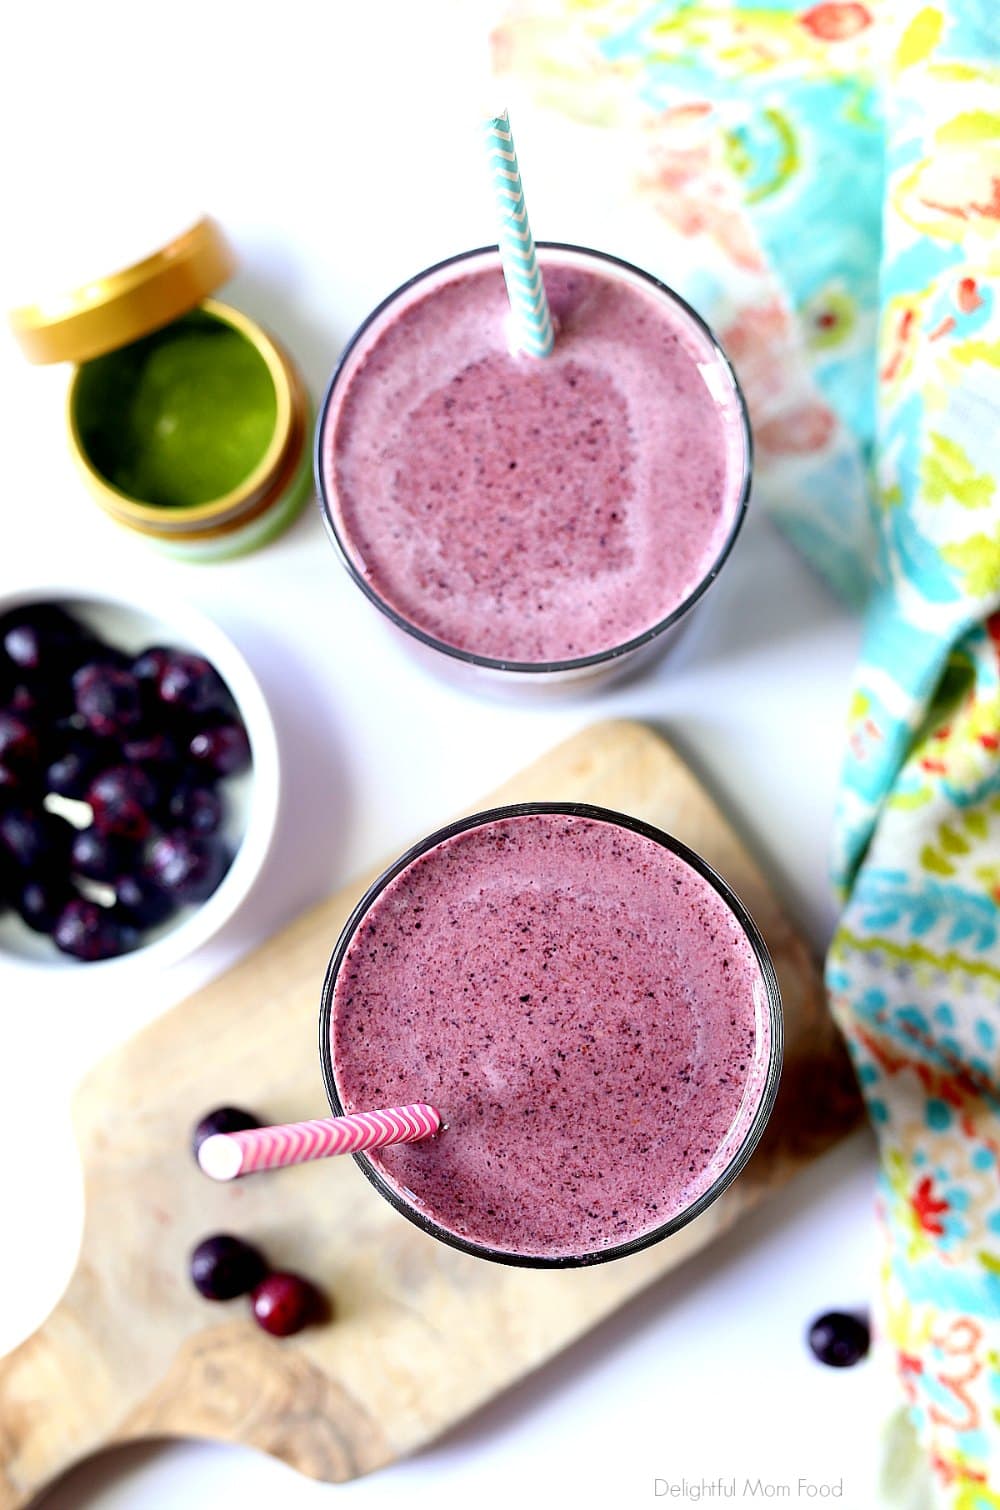 This glowing anti inflammatory matcha berry smoothie is made with anti inflammatory green tea powder, berries and all natural plant based ingredients! A delicious matcha smoothie that quickly mixes together for a healthy on-the-go meal! #matcha #berry #smoothie #recipe #easy #healthy #matchaberrysmoothie #matchagreentea #recipe #vegan | Recipe at Delightful Mom Food